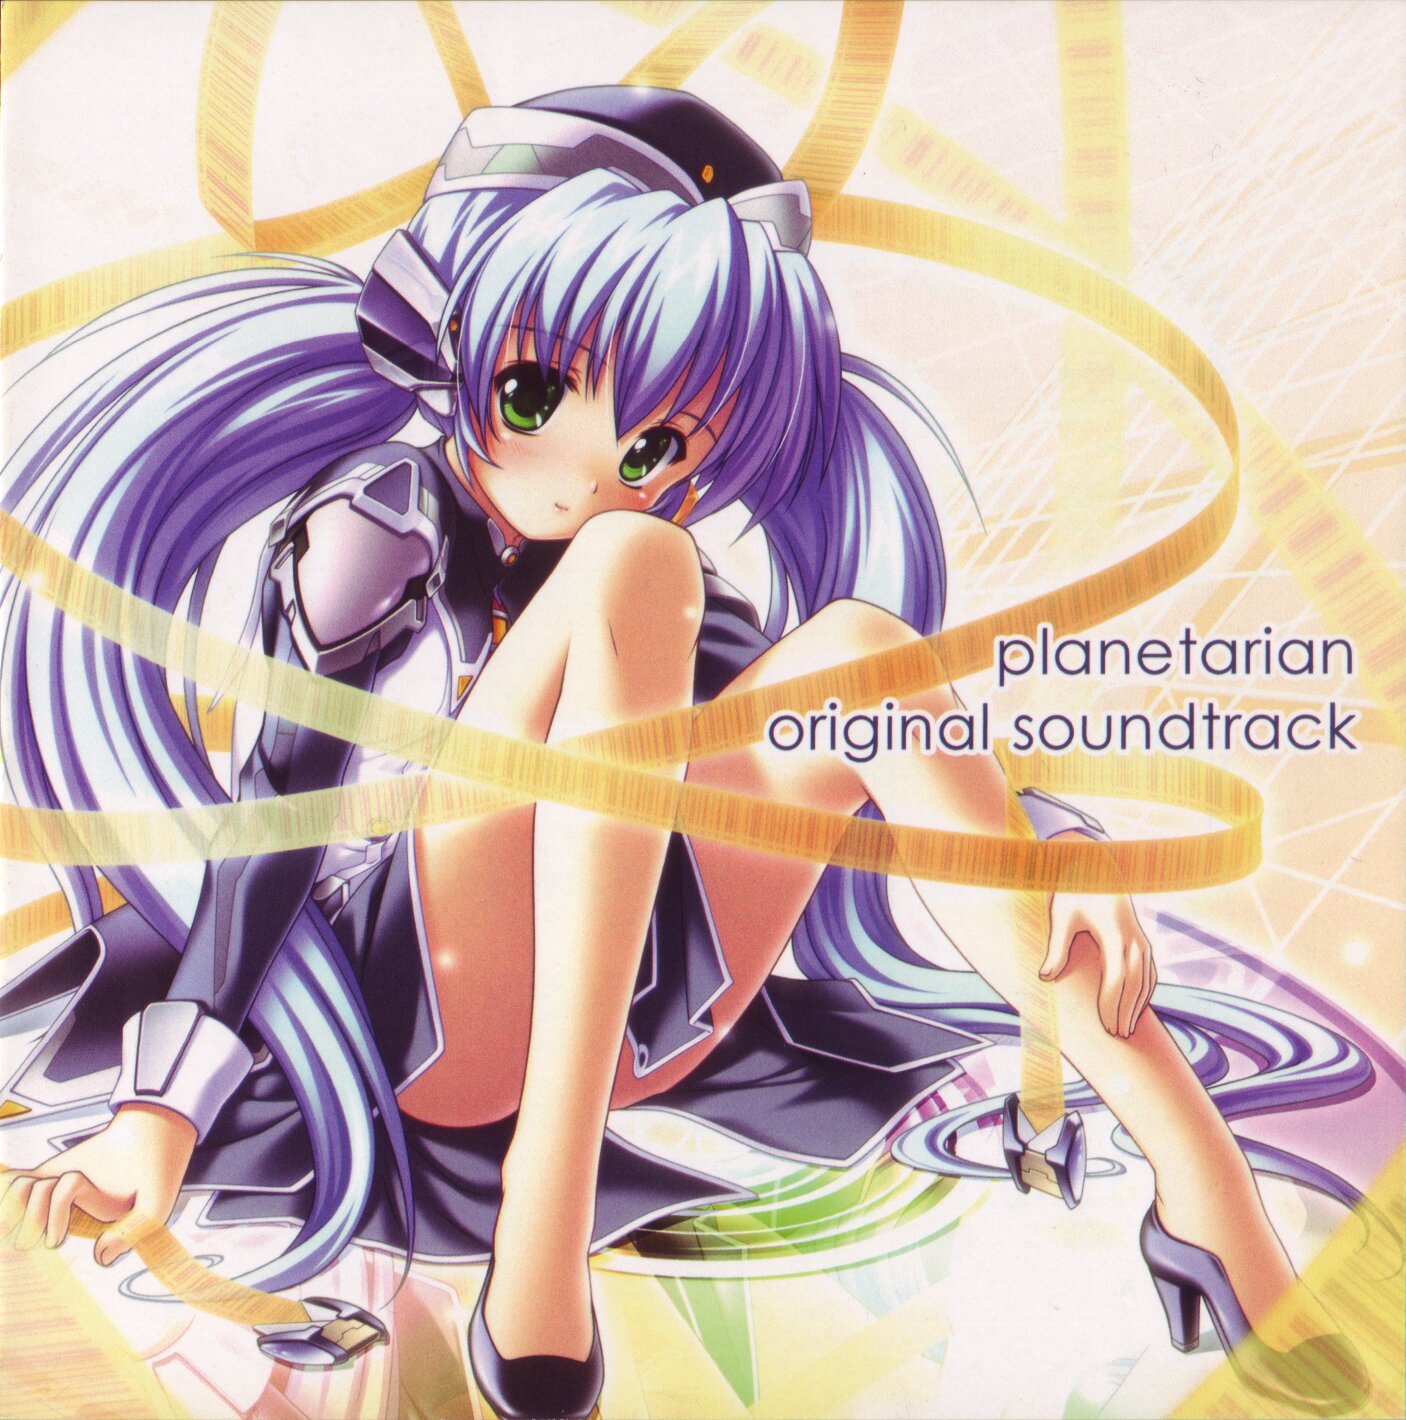 Planetarian: The Reverie Of A Little Planet #26